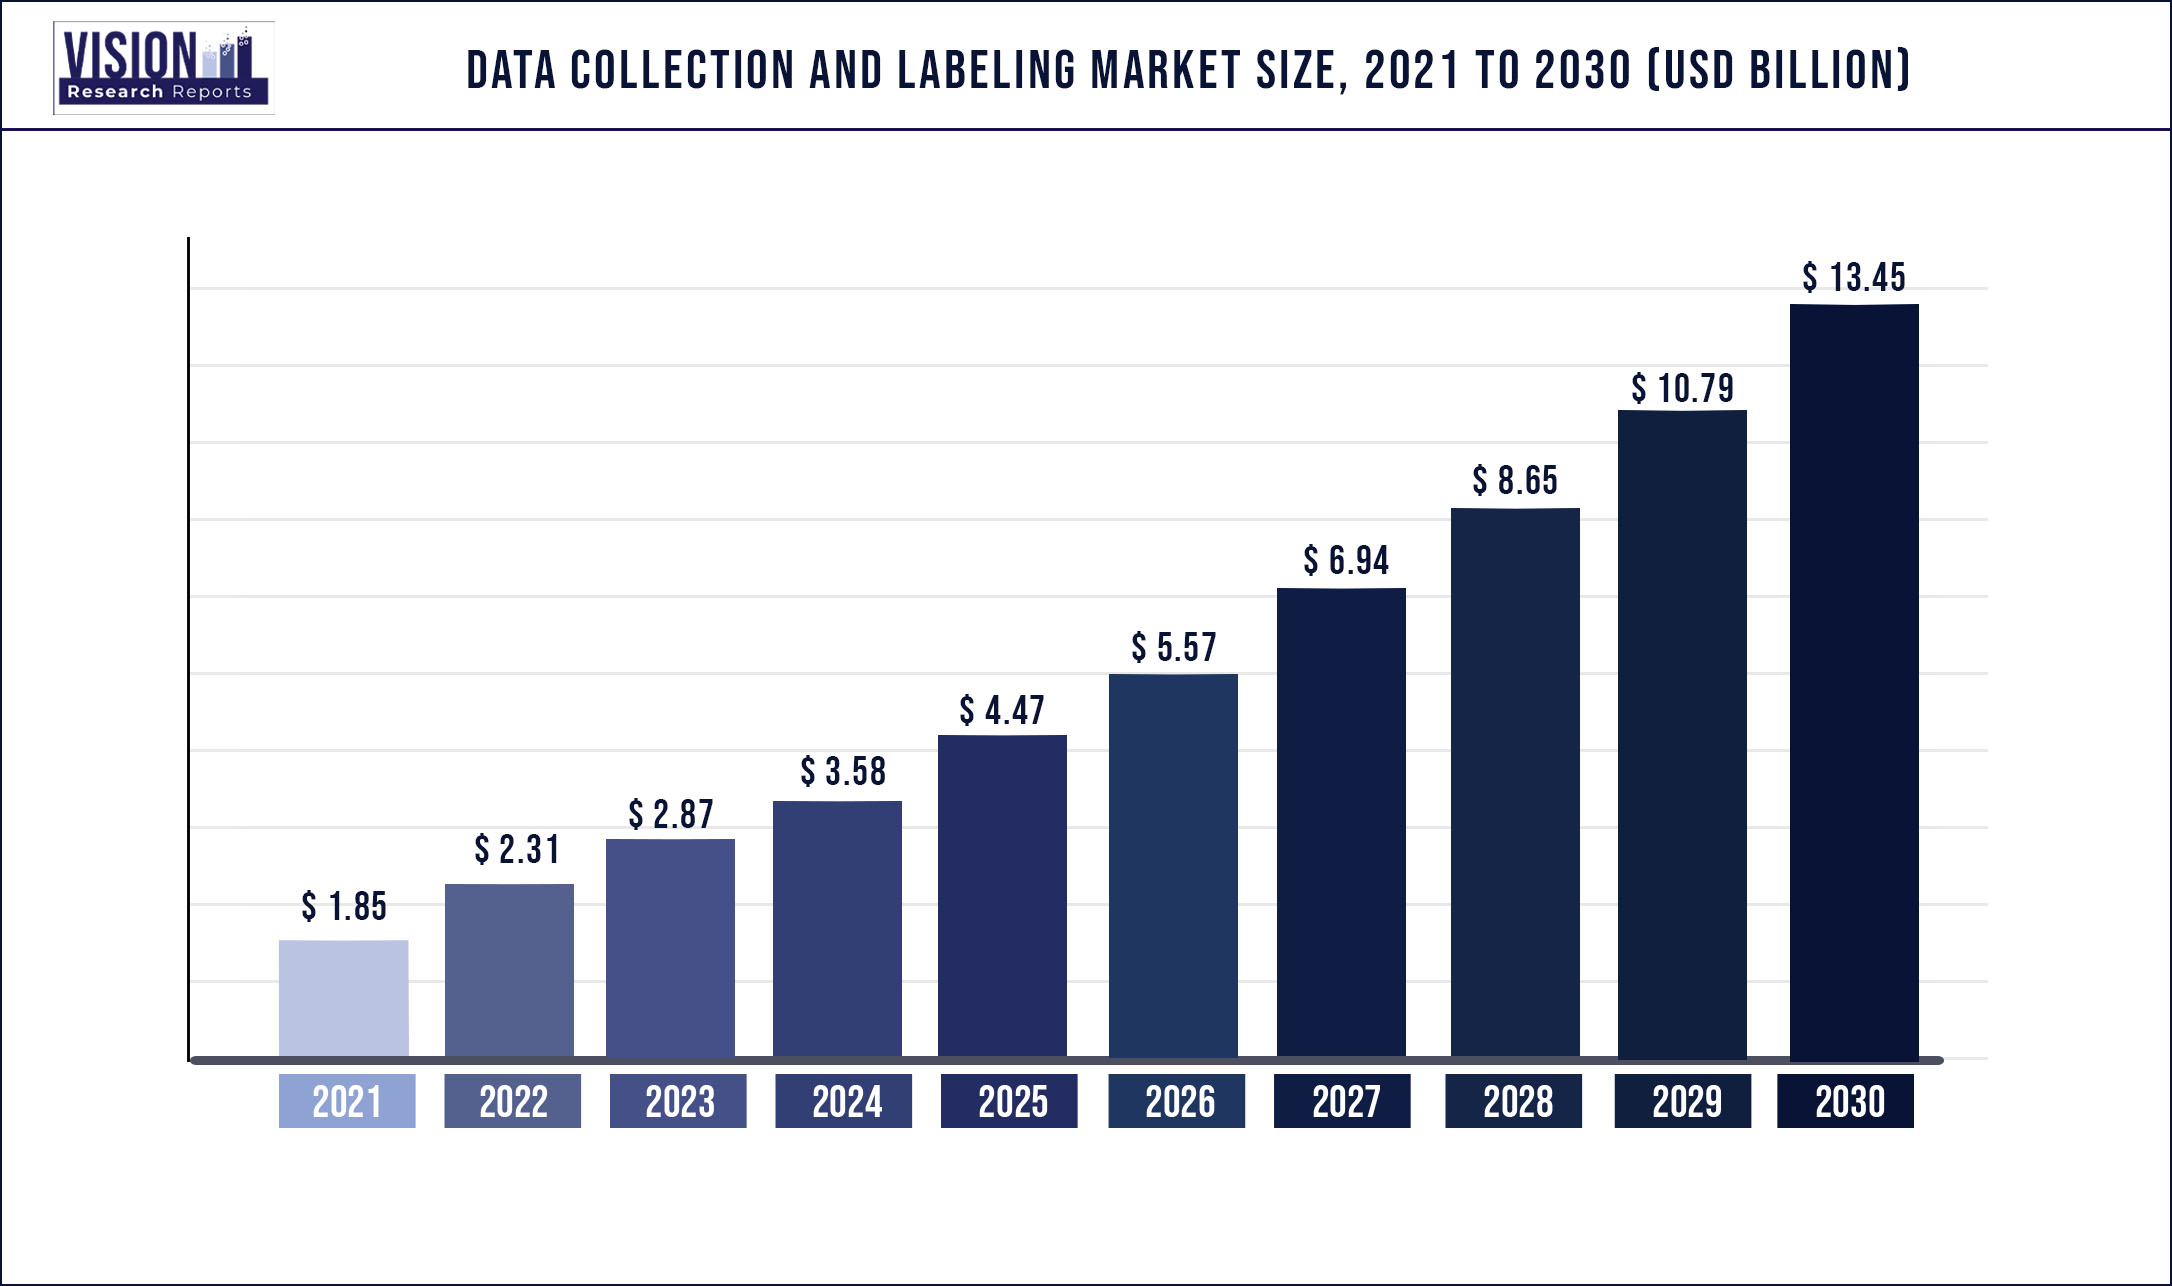 Data Collection And Labeling Market Size 2021 to 2030